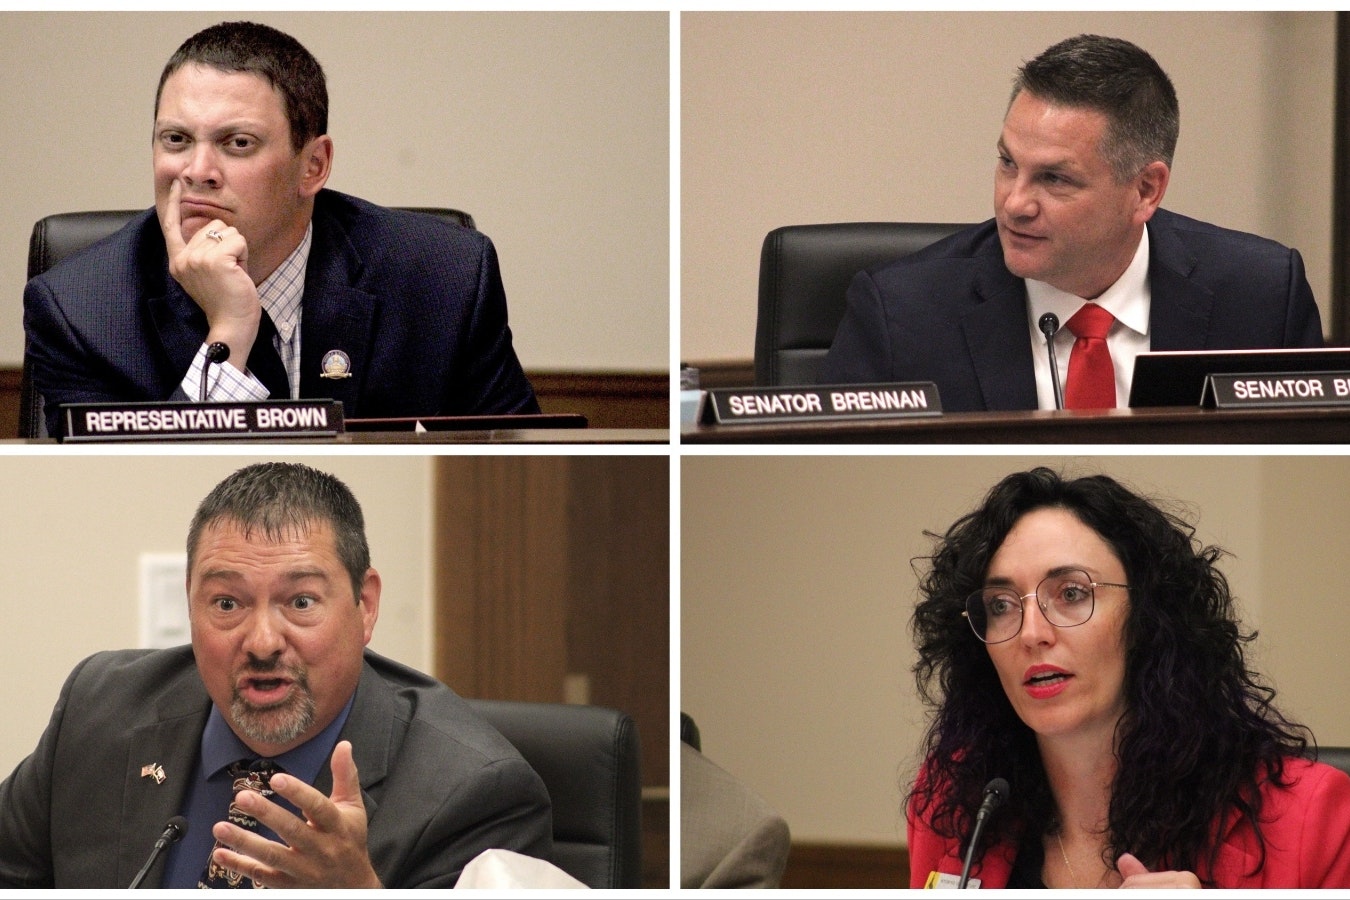 Members of the Wyoming Legislature's Joint Education Committee listened to hours of testimony and discussion of a bill that would ban teaching sexual orientation and gender identity themes to children in kindergarten through grade three in Wyoming. From above left, Rep. Landon Brown, Rep. Bo Biteman, Rep. Karlee Provenza and Ryan Berger.